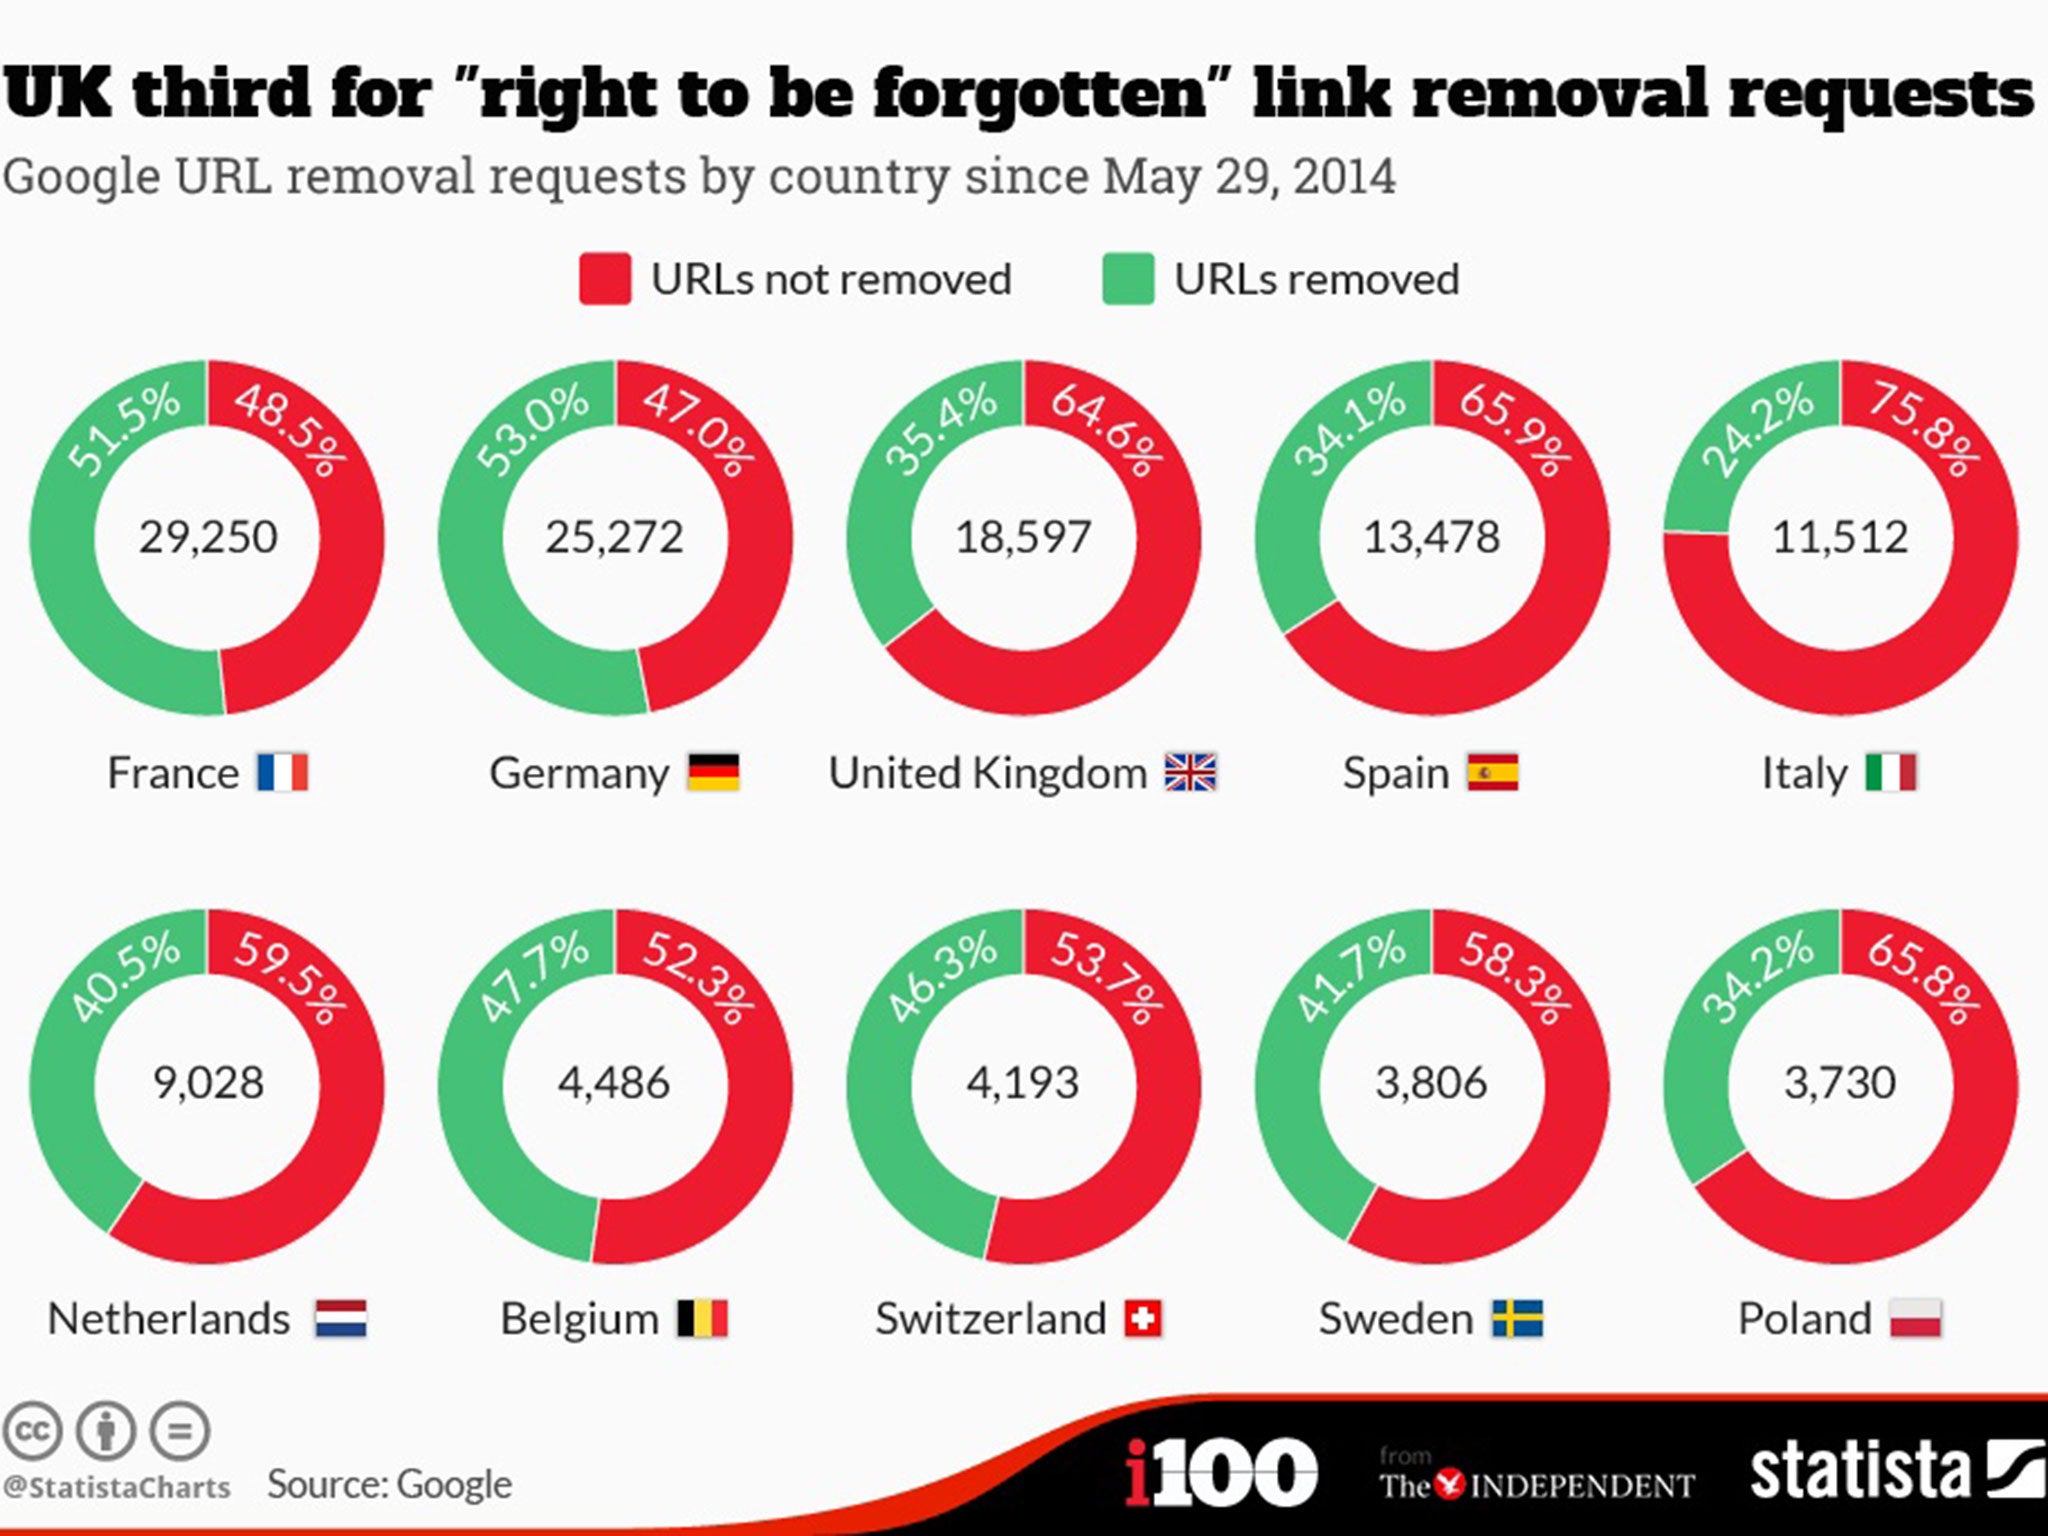 The French have made the most requests to Google to remove web links from its results under the 'right to be forgotten' in Europe